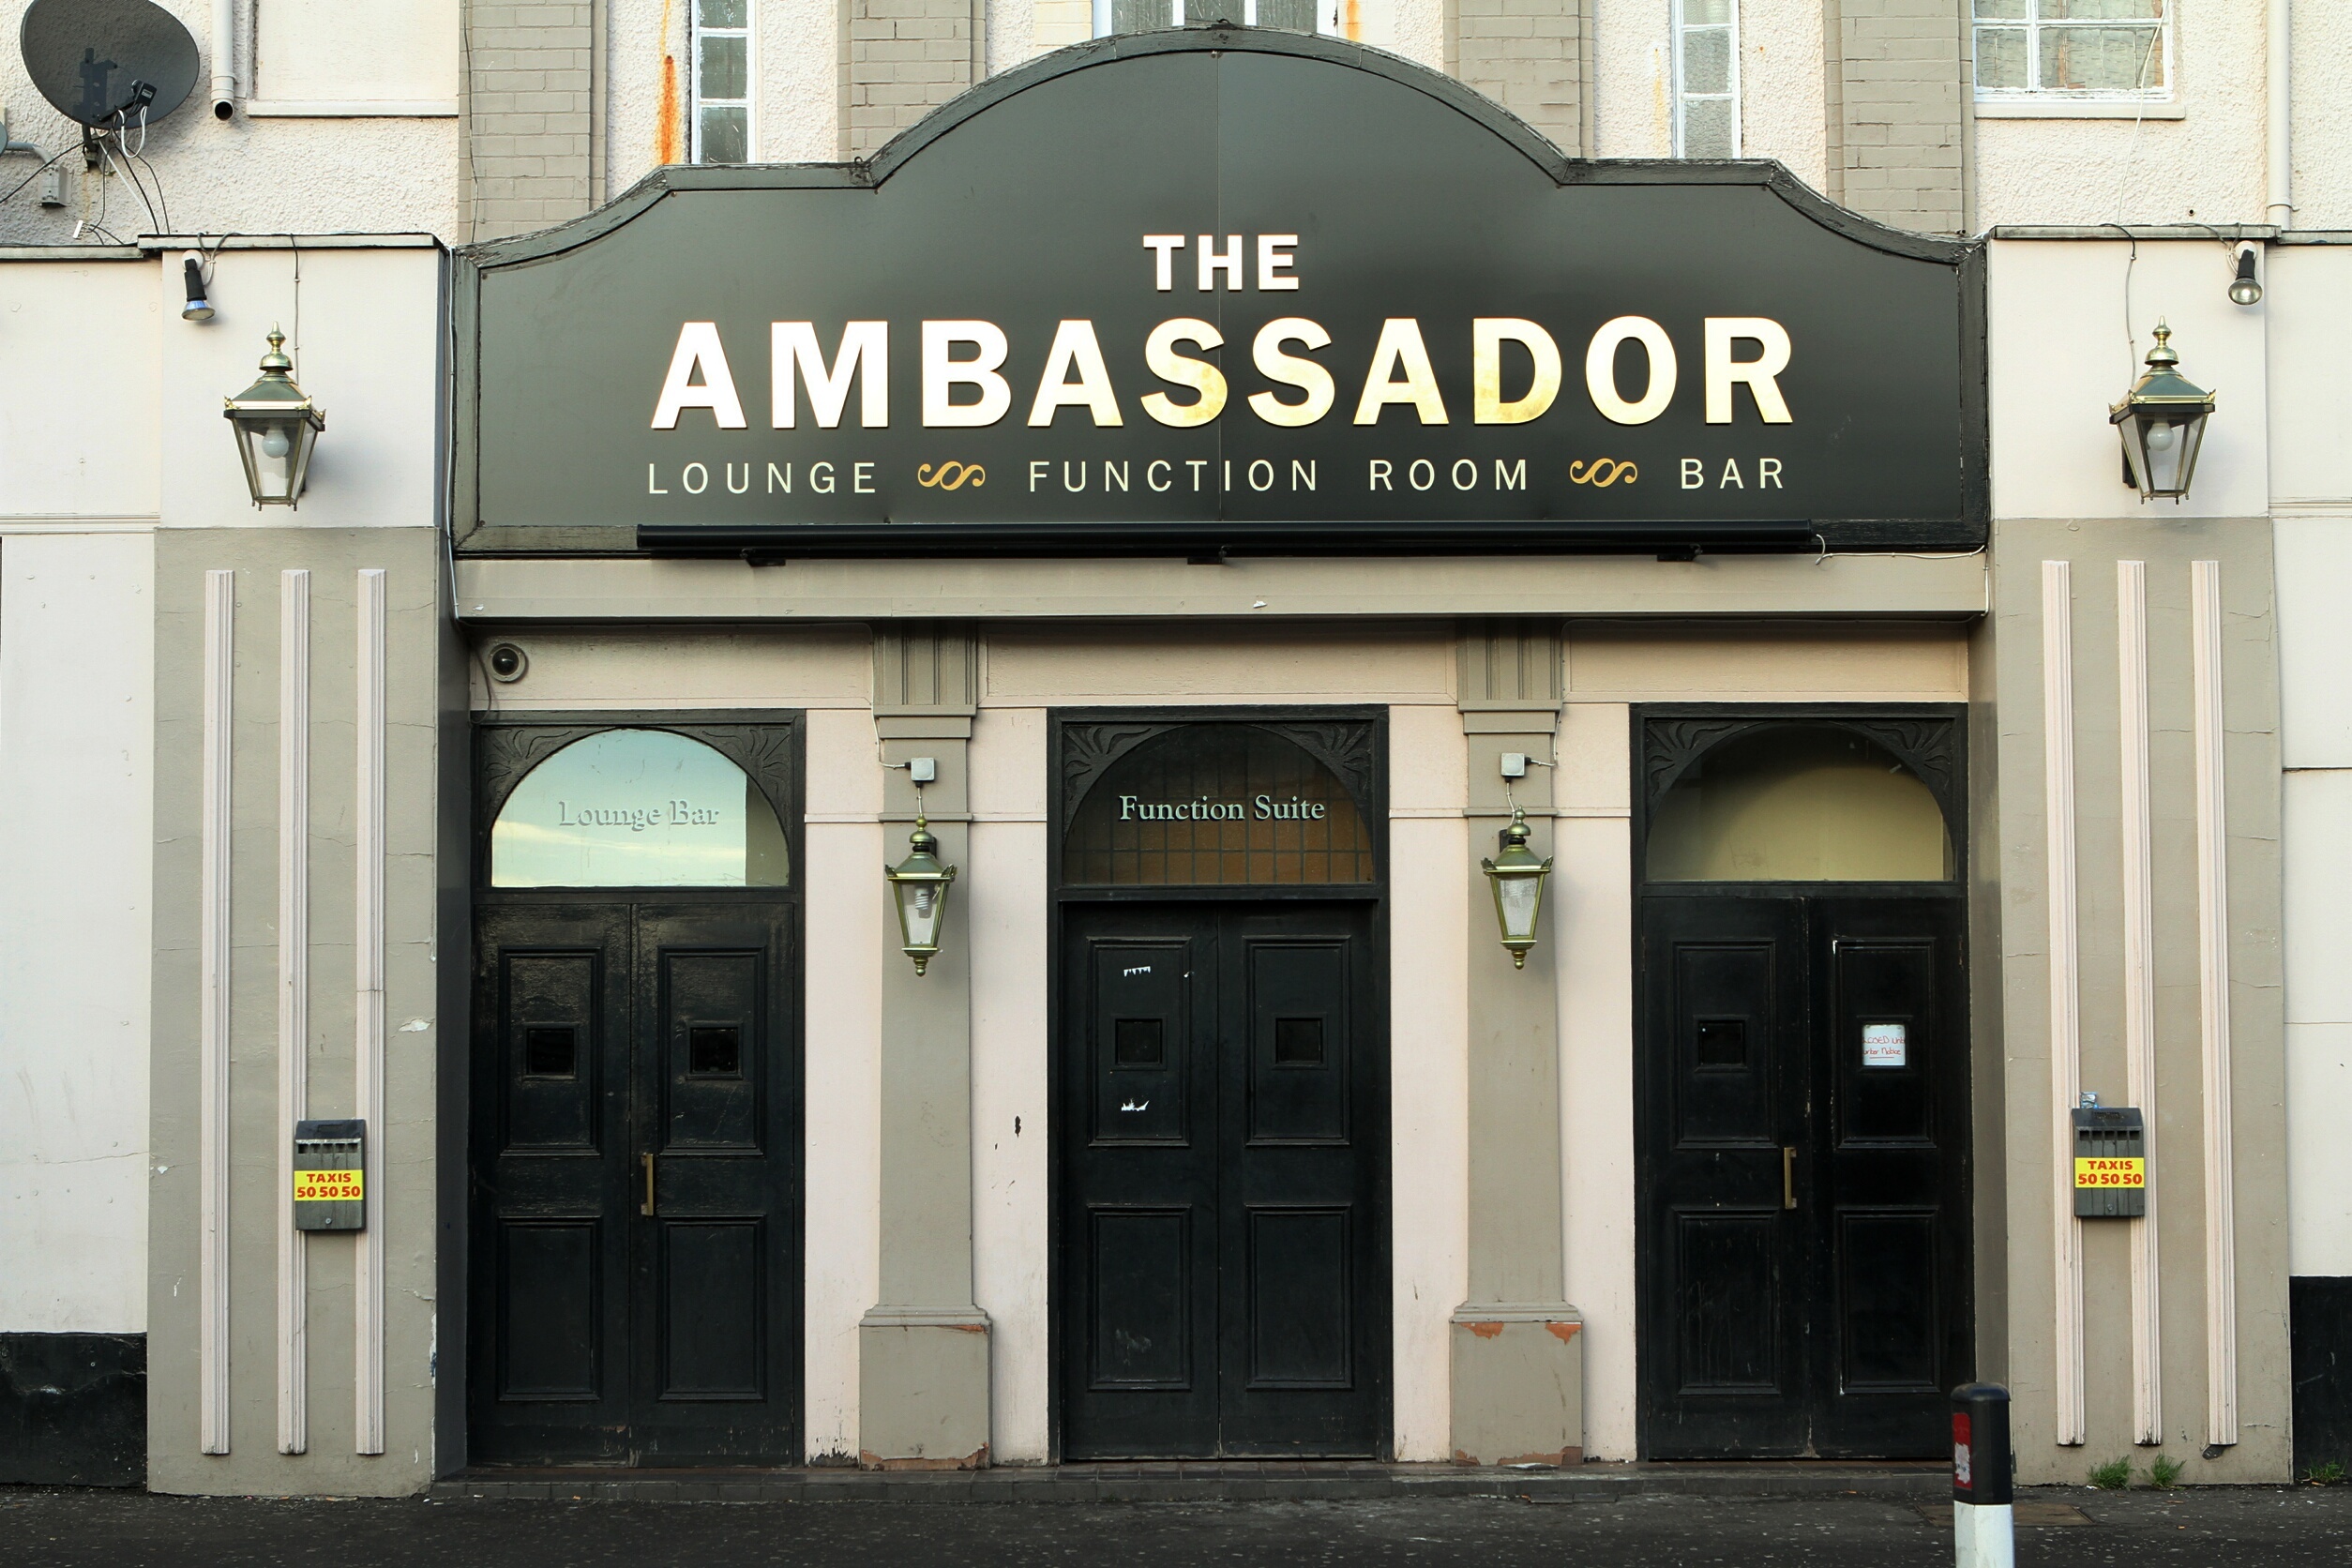 The two men attempted to break in to the Ambassador Bar on Clepington Road